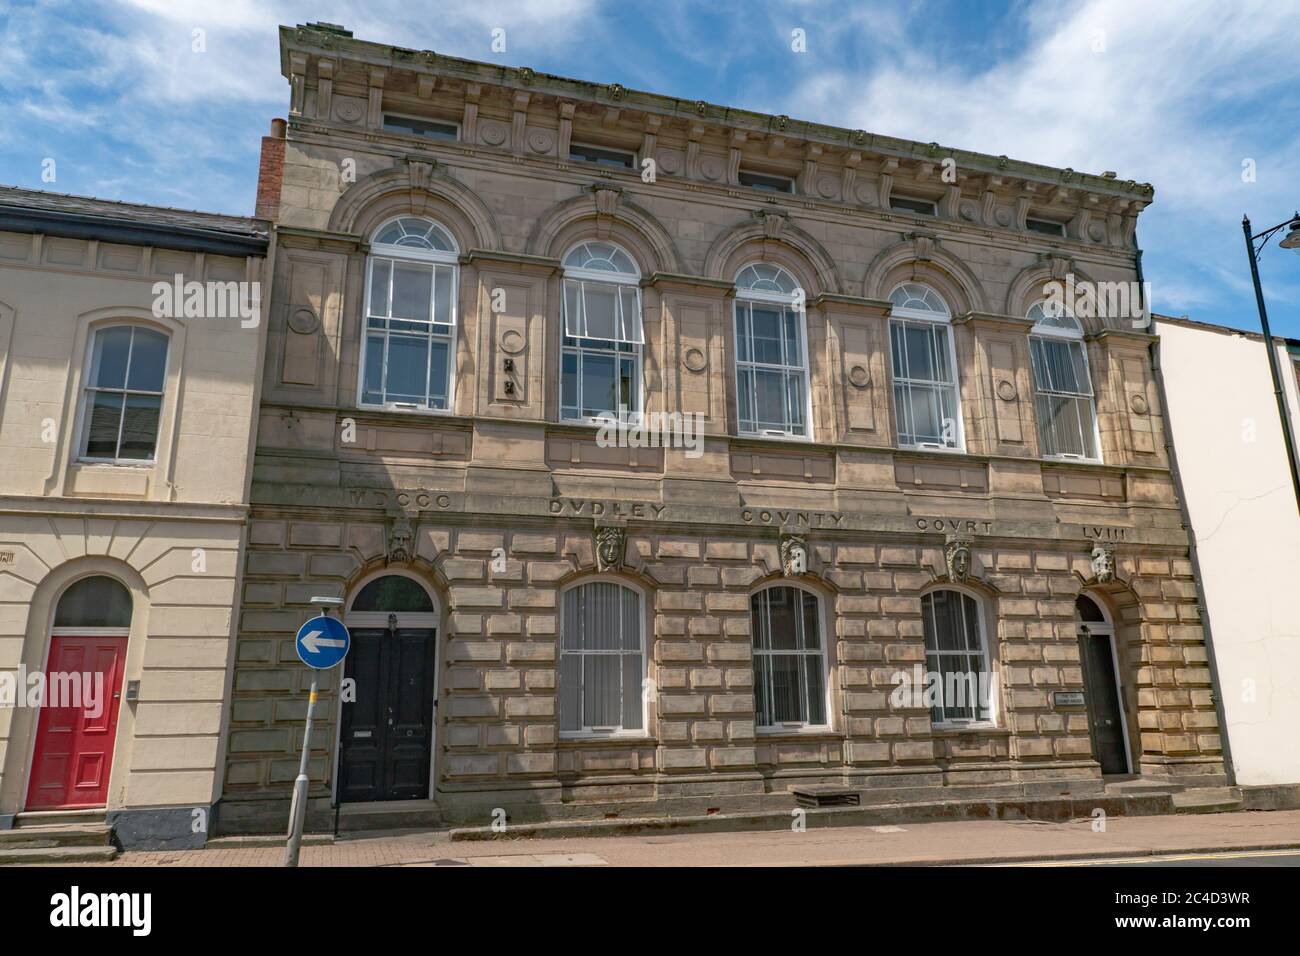 The Old County Court House, Priory Street, Dudley. West Midlands. UK Stock Photo